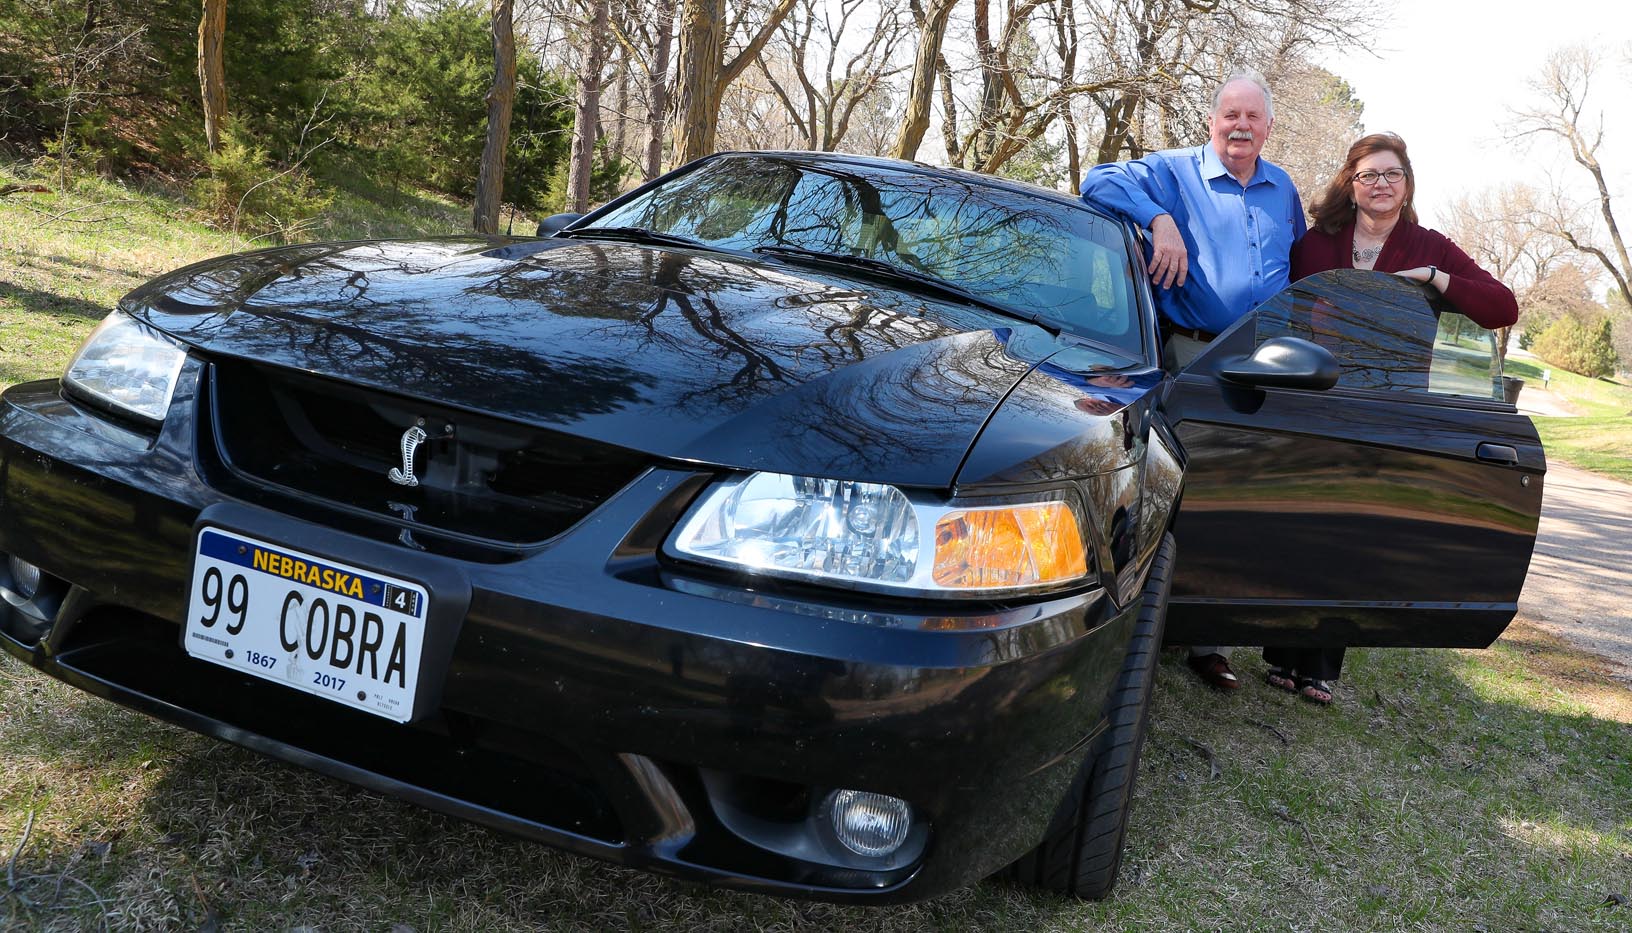 Cyndi Schroeder and her husband, Larry, own a 1999 Ford Mustang Cobra. The couple enjoys traveling to car shows across the United States, visiting areas they've never seen. (Photo by Corbey R. Dorsey, UNK Communications)